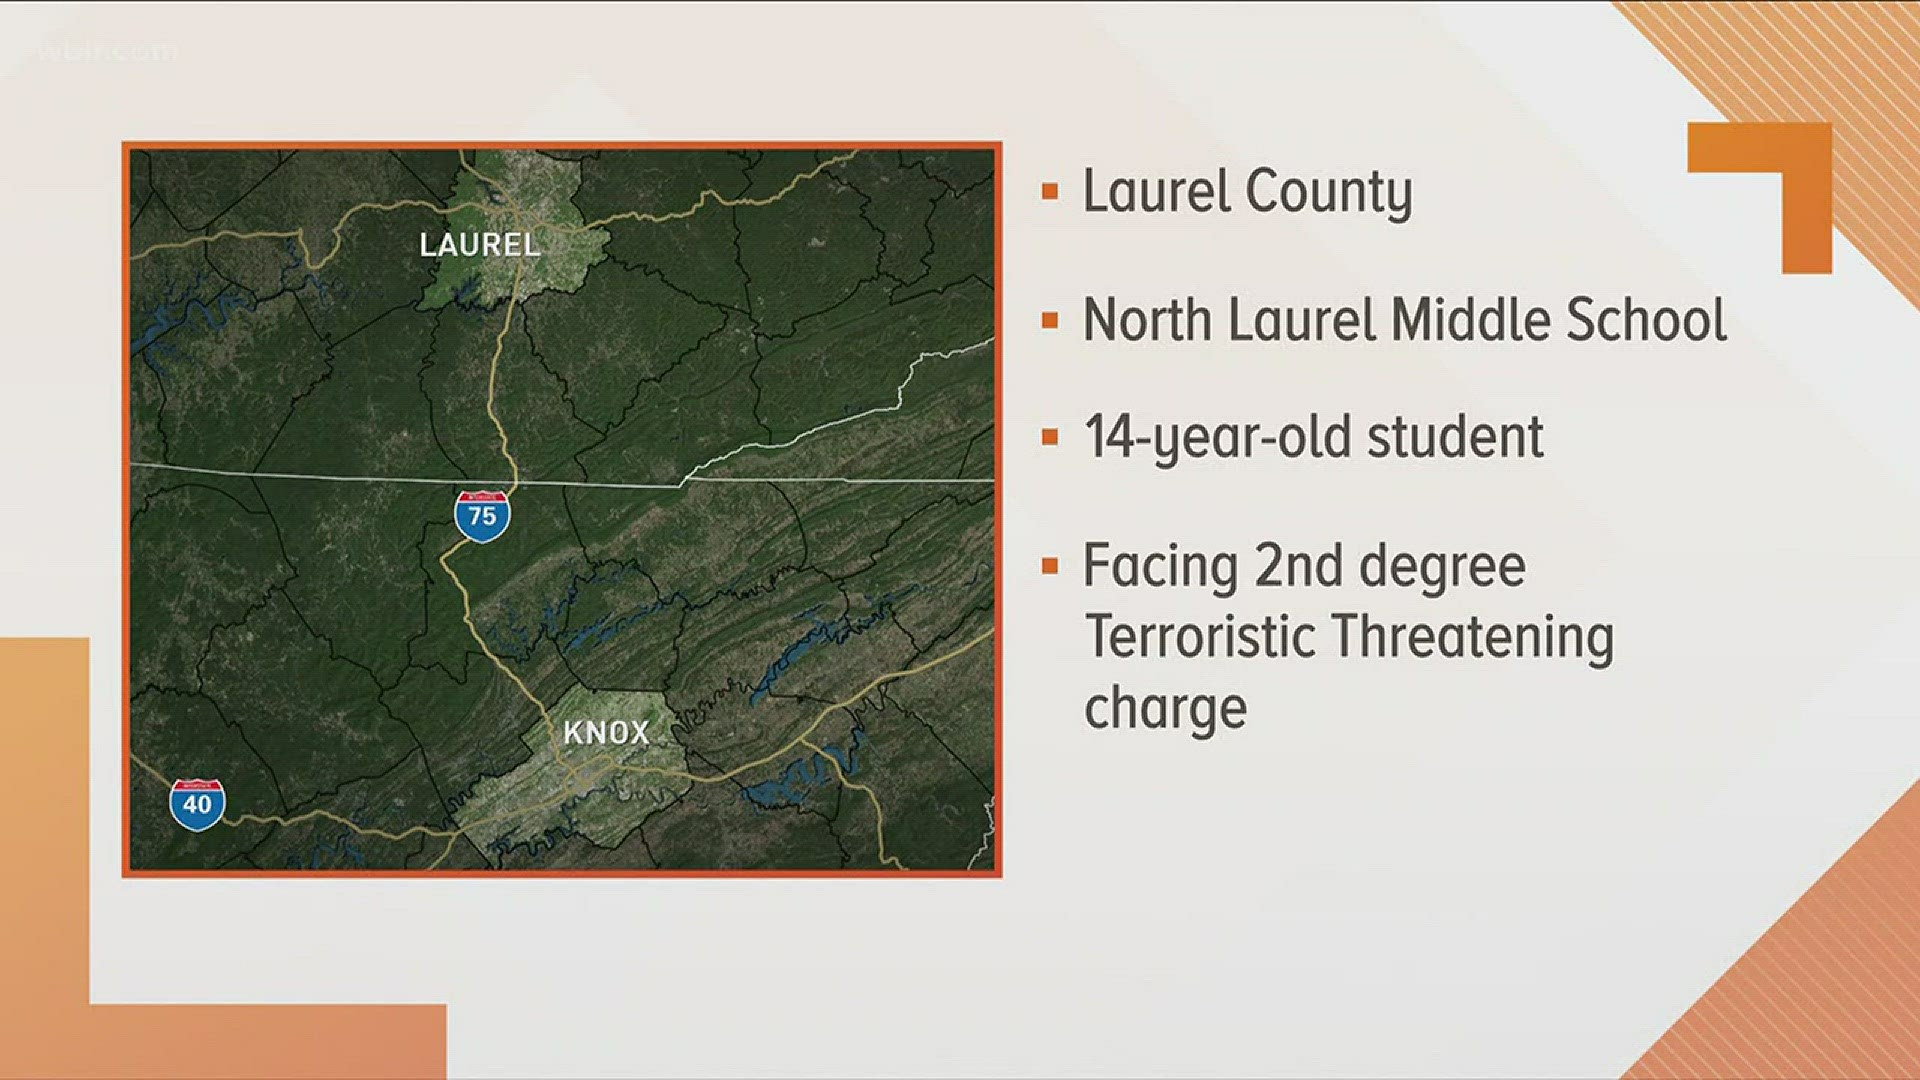 Kentucky State Police said they arrested a 14-year-old boy who threatened to shoot up a Laurel County middle school on social media.